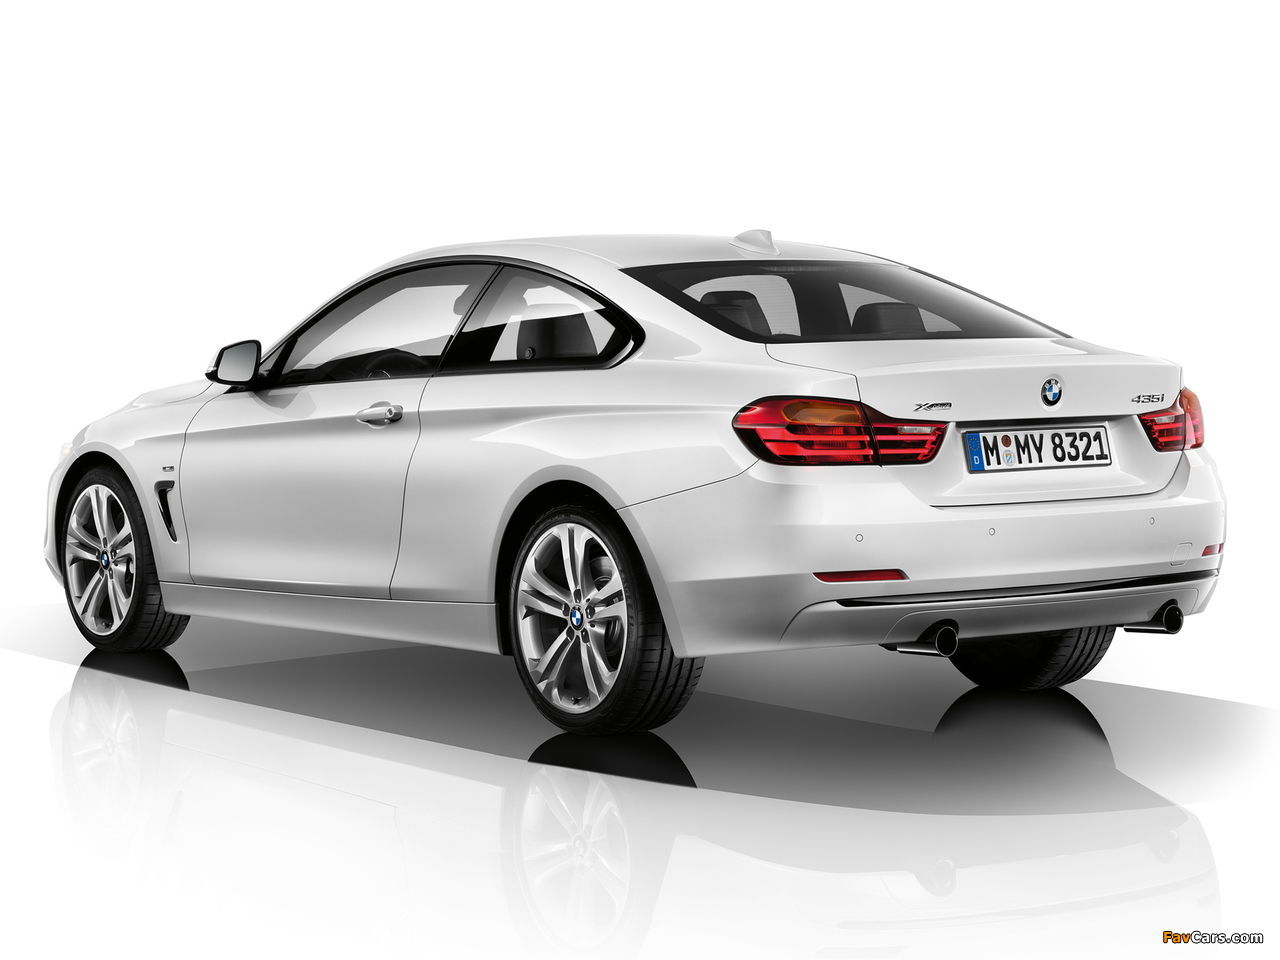 BMW 435i xDrive Coupé Sport Line (F32) 2013 pictures (1280 x 960)